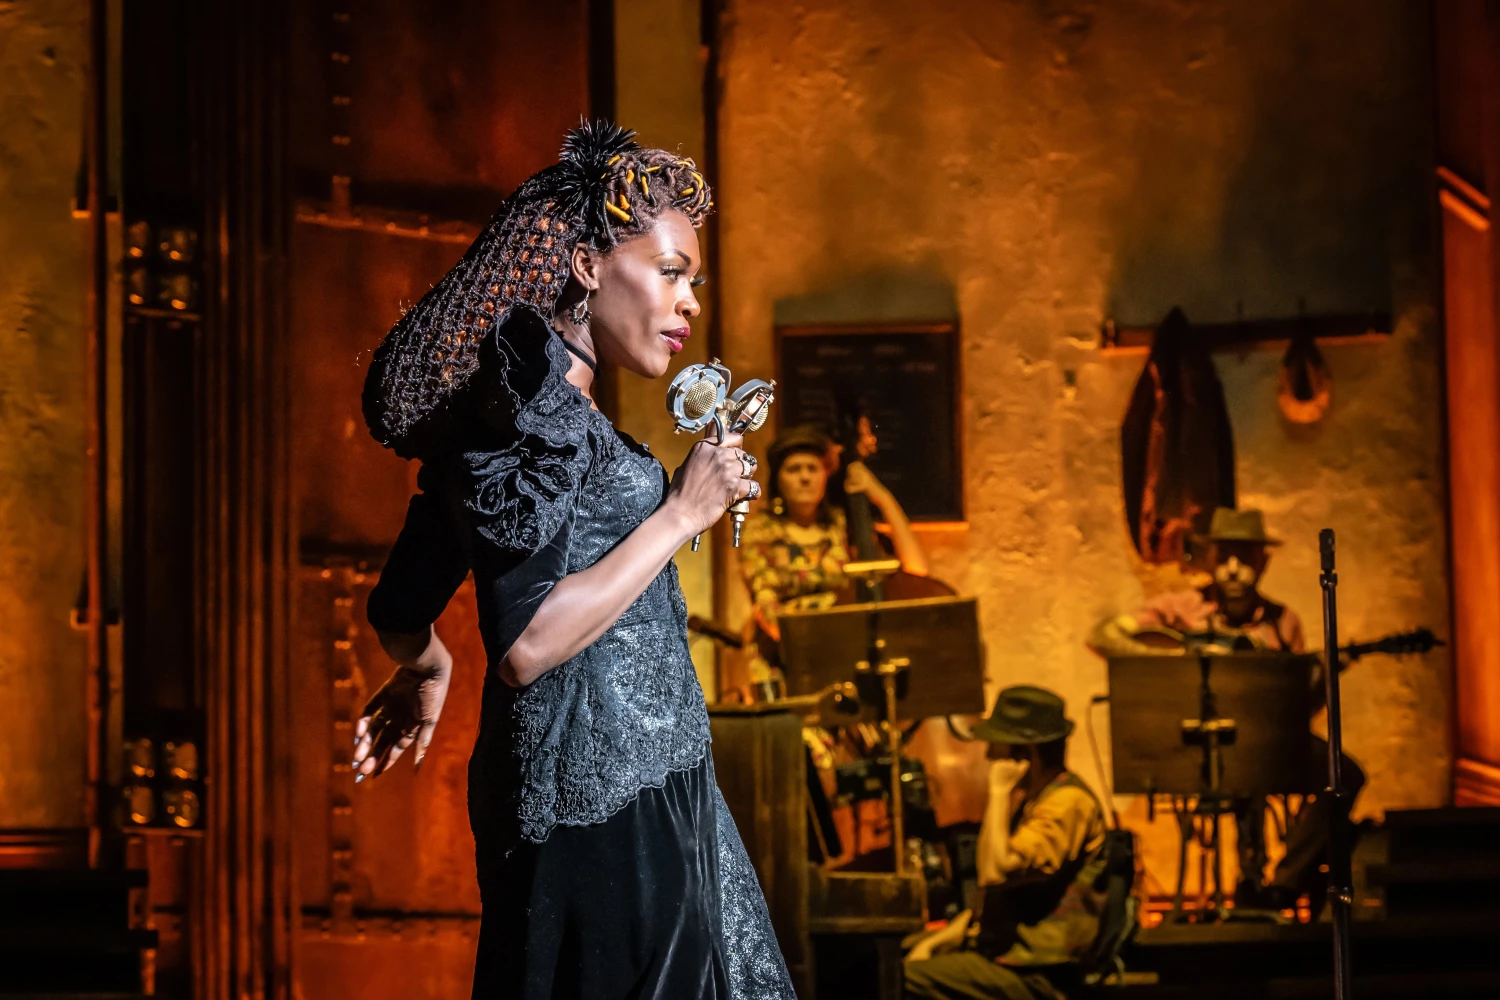 Hadestown: What to expect - 3